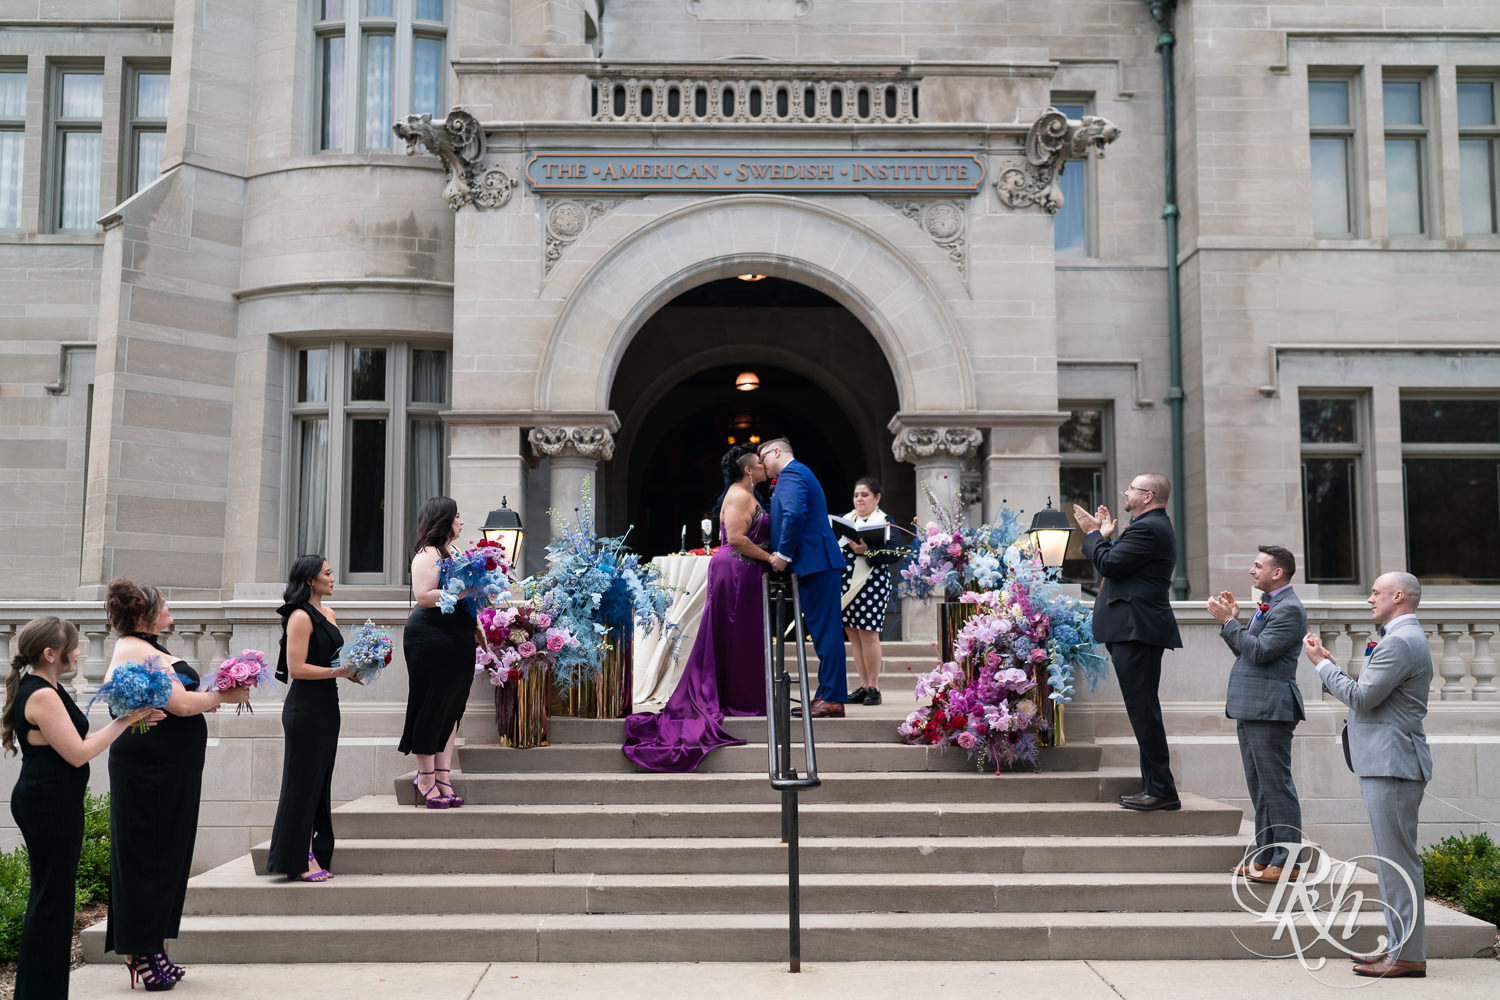 Filipino bride in purple wedding dress and groom kiss at wedding ceremony at the American Swedish Institute in Minneapolis, Minnesota.